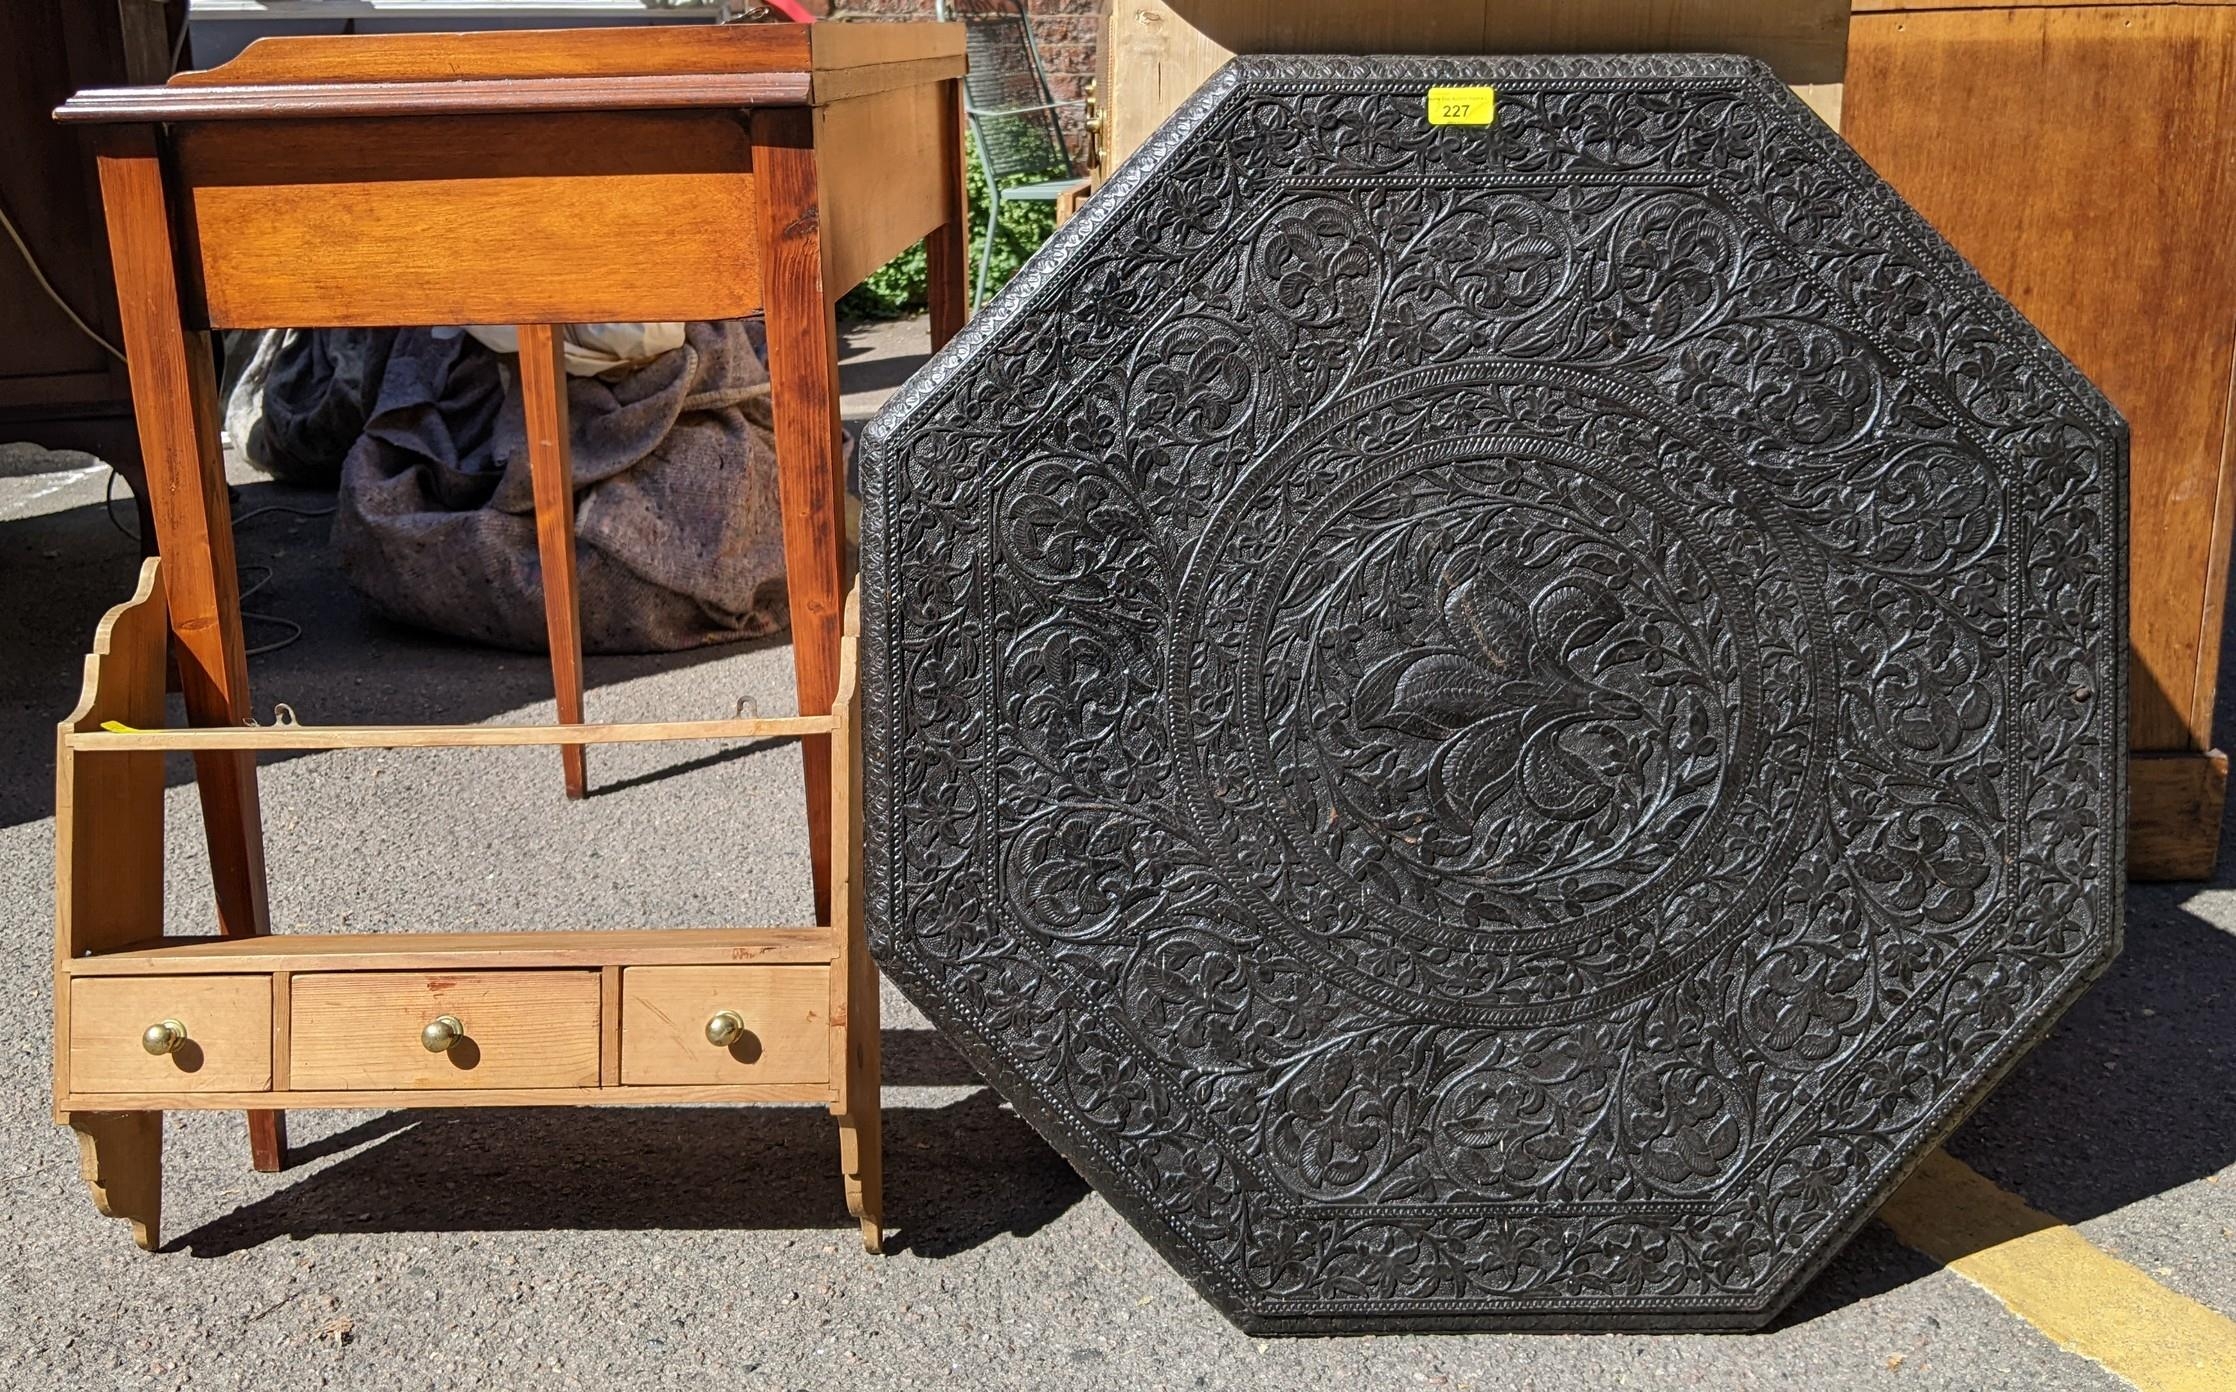 A late 19th/early 20th century Indian carved table top with a pine spice rack Location: